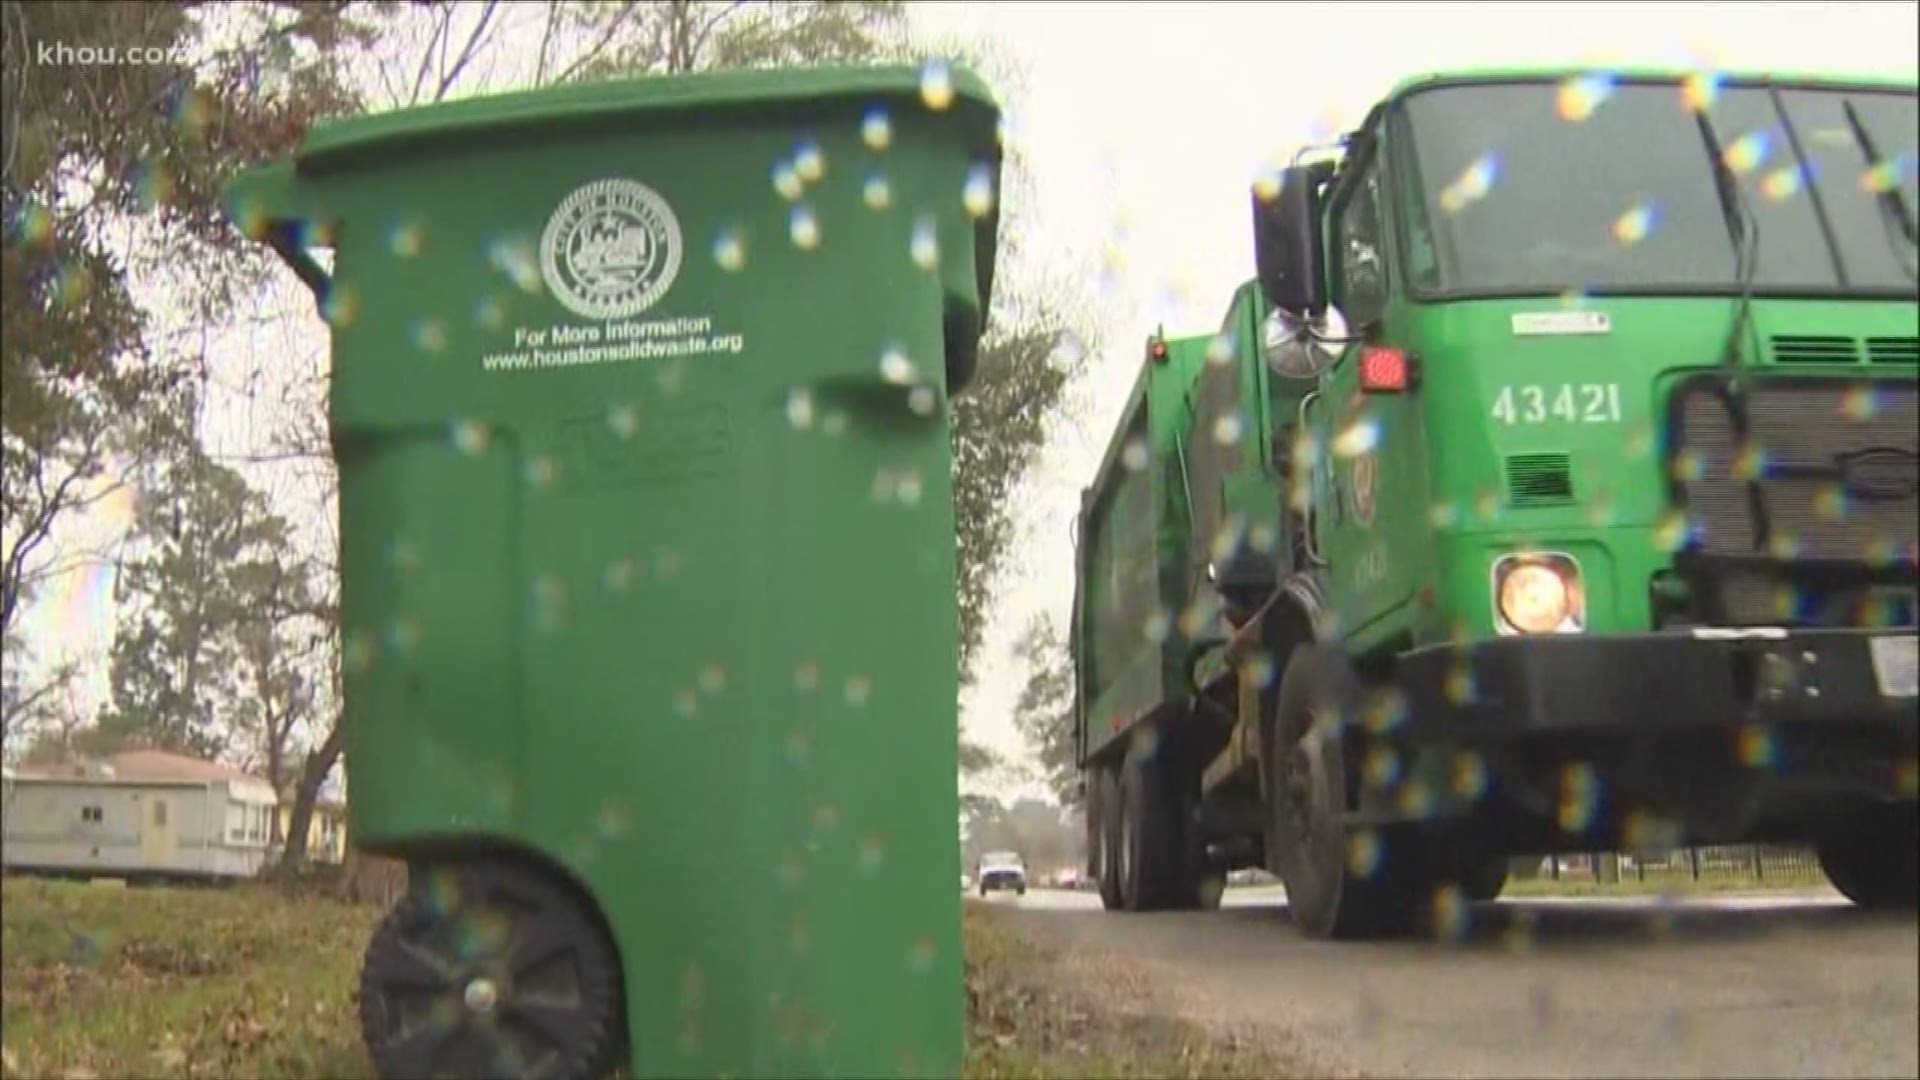 The emergency spending agenda item comes after recent reports of residents' recycling bins not being emptied on scheduled days or at all.